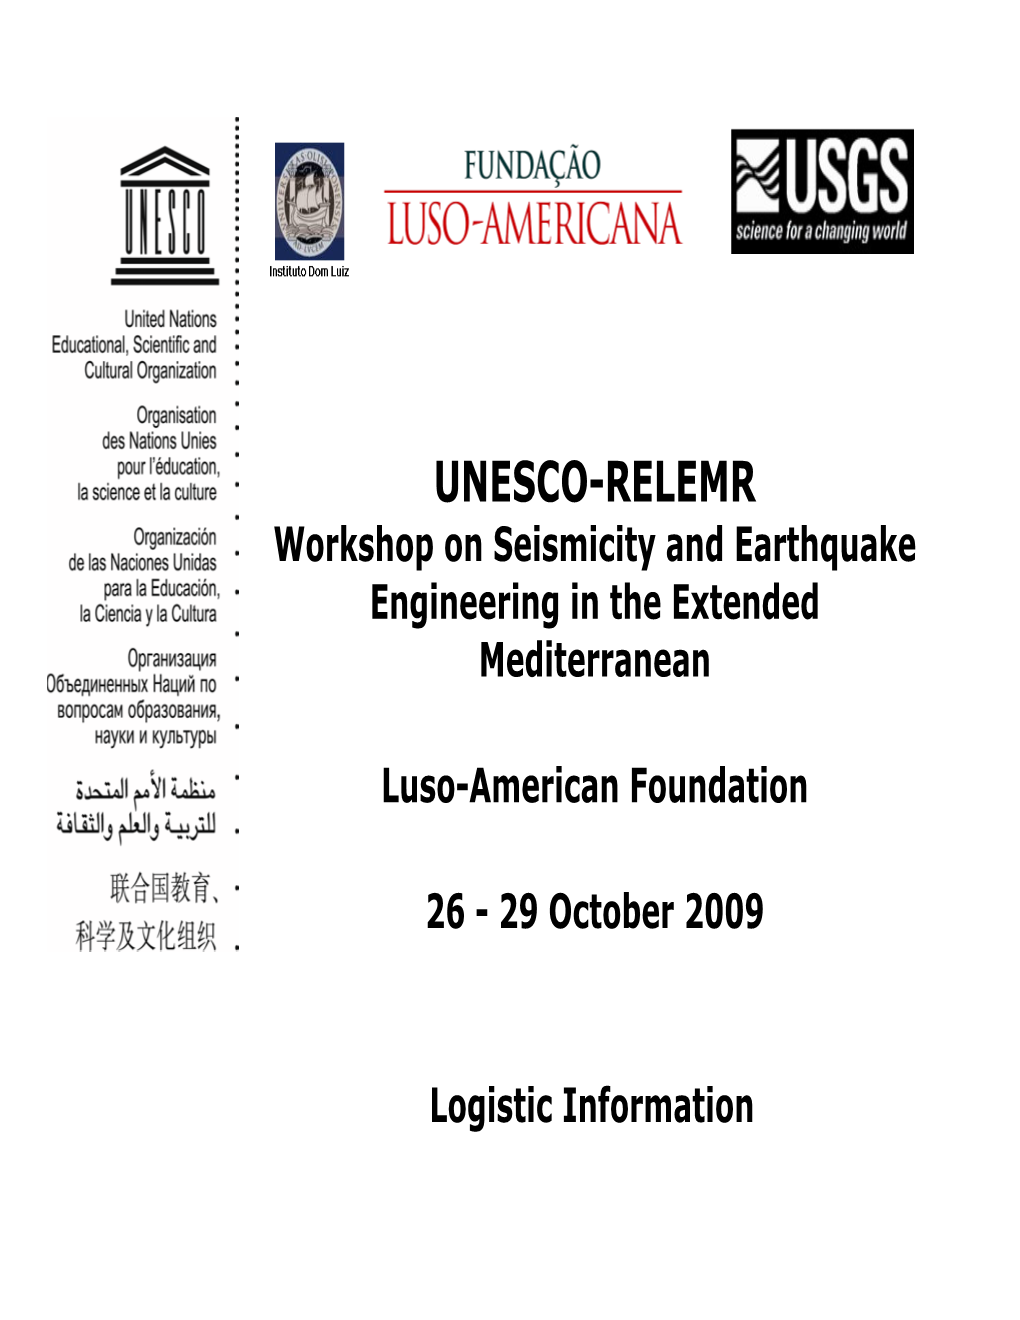 UNESCO-RELEMR Workshop on Seismicity and Earthquake Engineering in the Extended Mediterranean